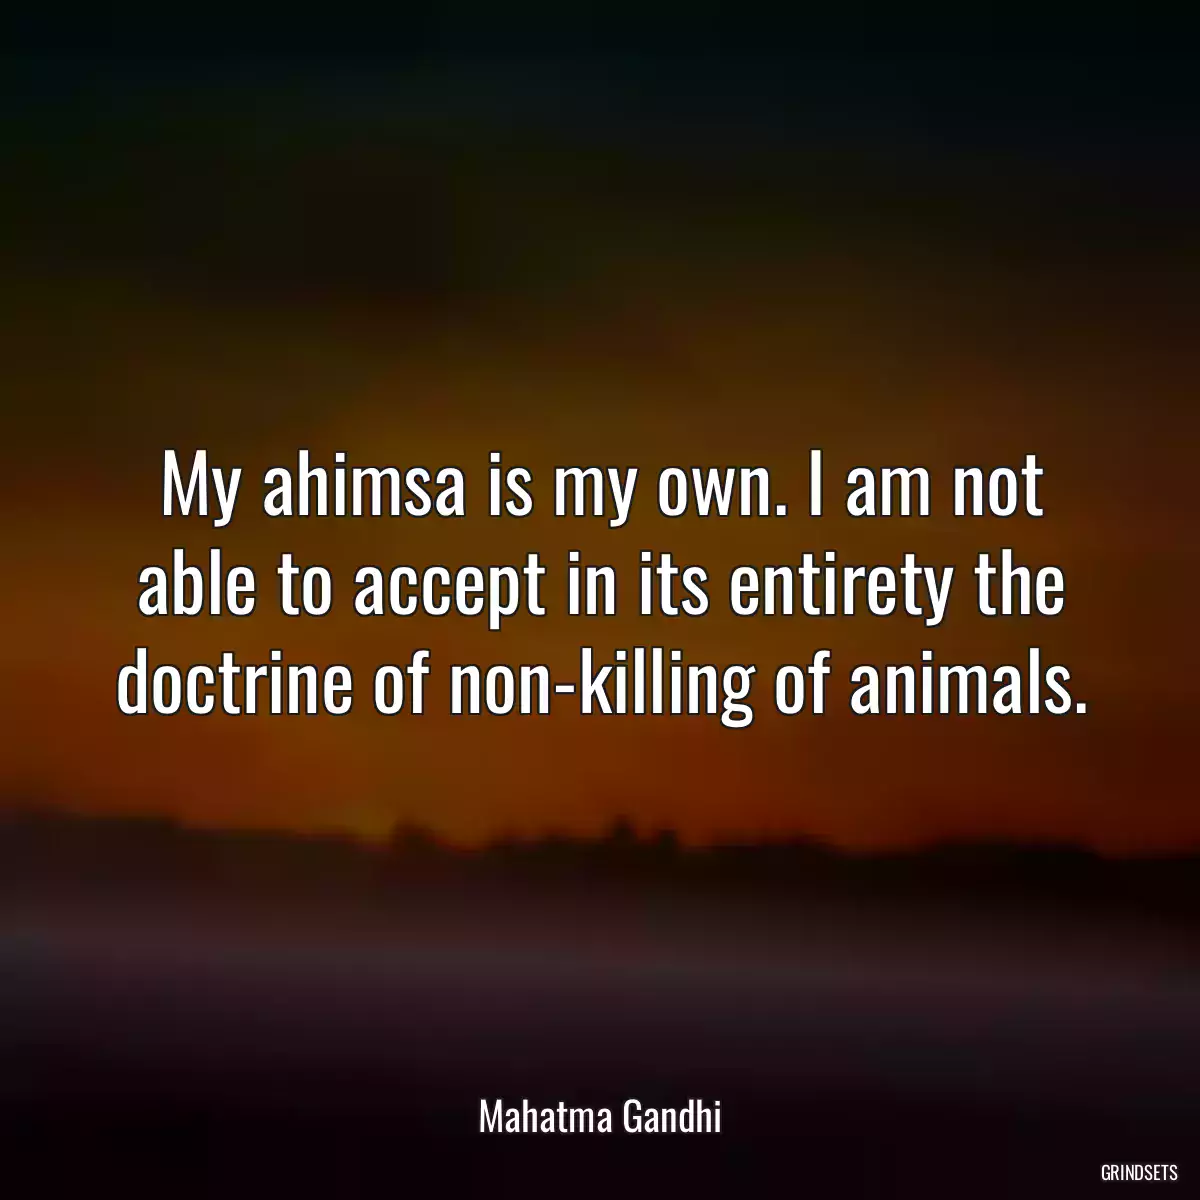 My ahimsa is my own. I am not able to accept in its entirety the doctrine of non-killing of animals.